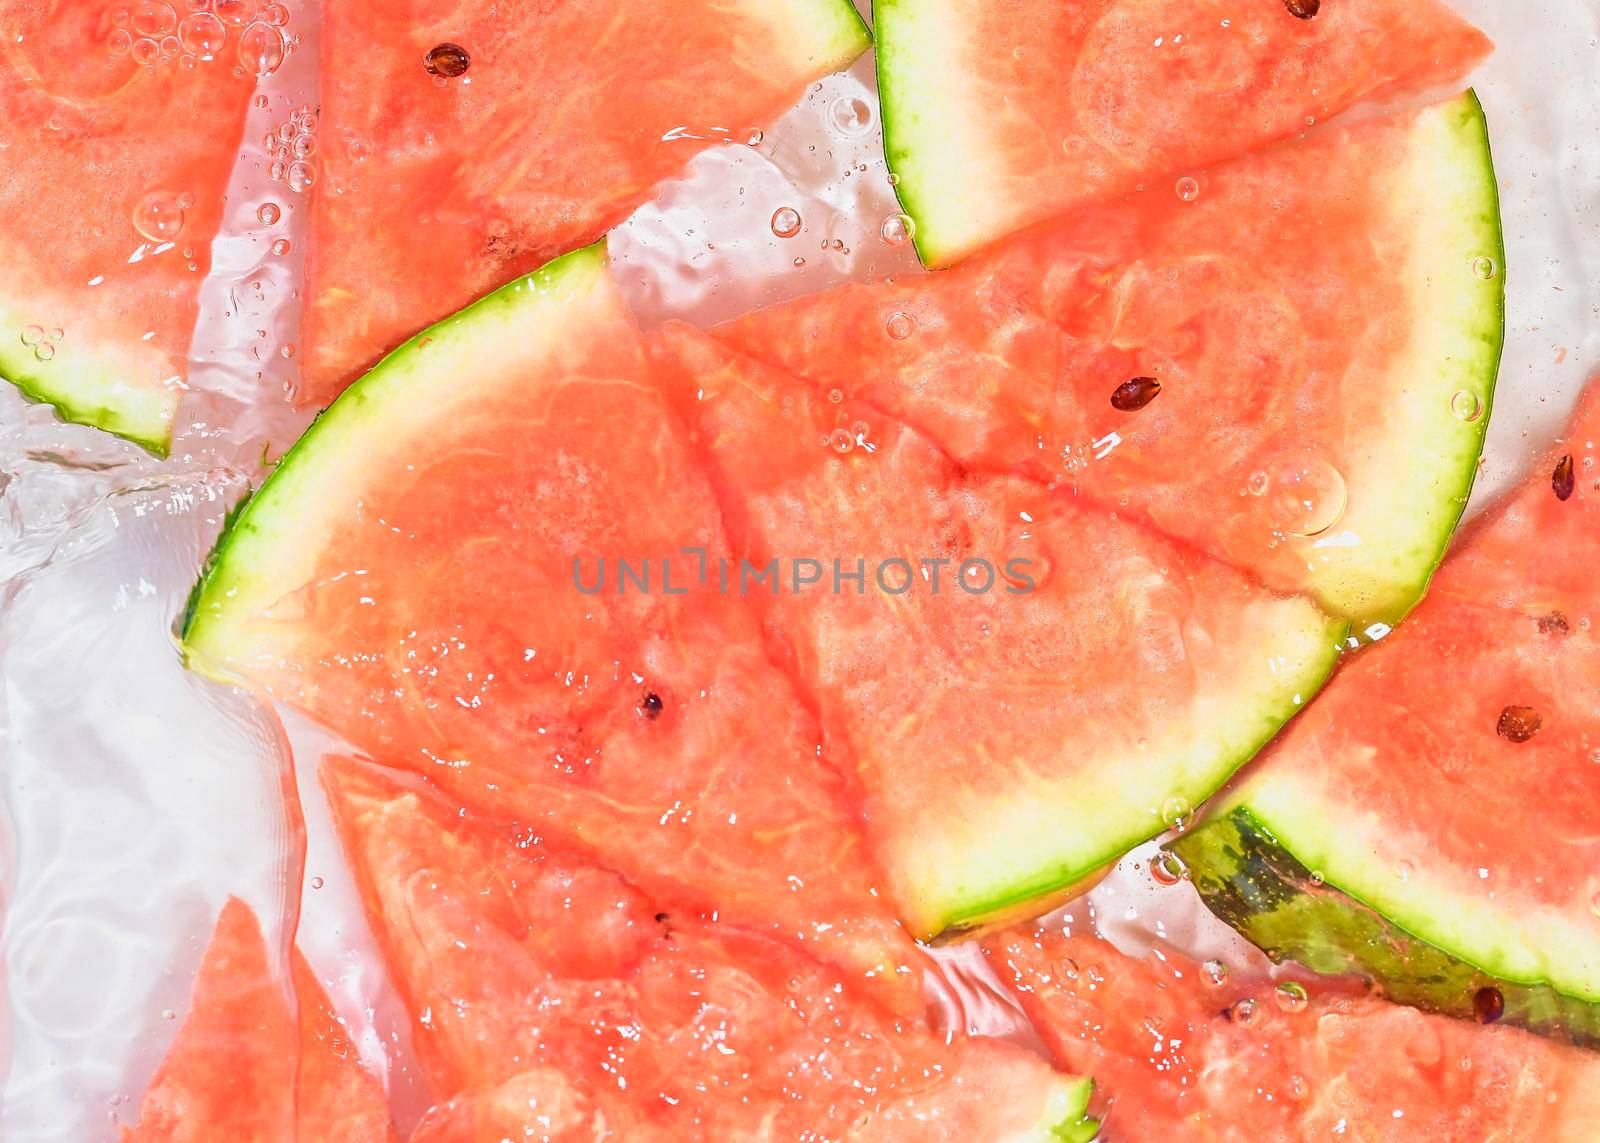 Slices of melon in water on white background. Melon close-up in liquid with bubbles. Slices of red ripe melon in water. Macro image of fruits in water by roman_nerud